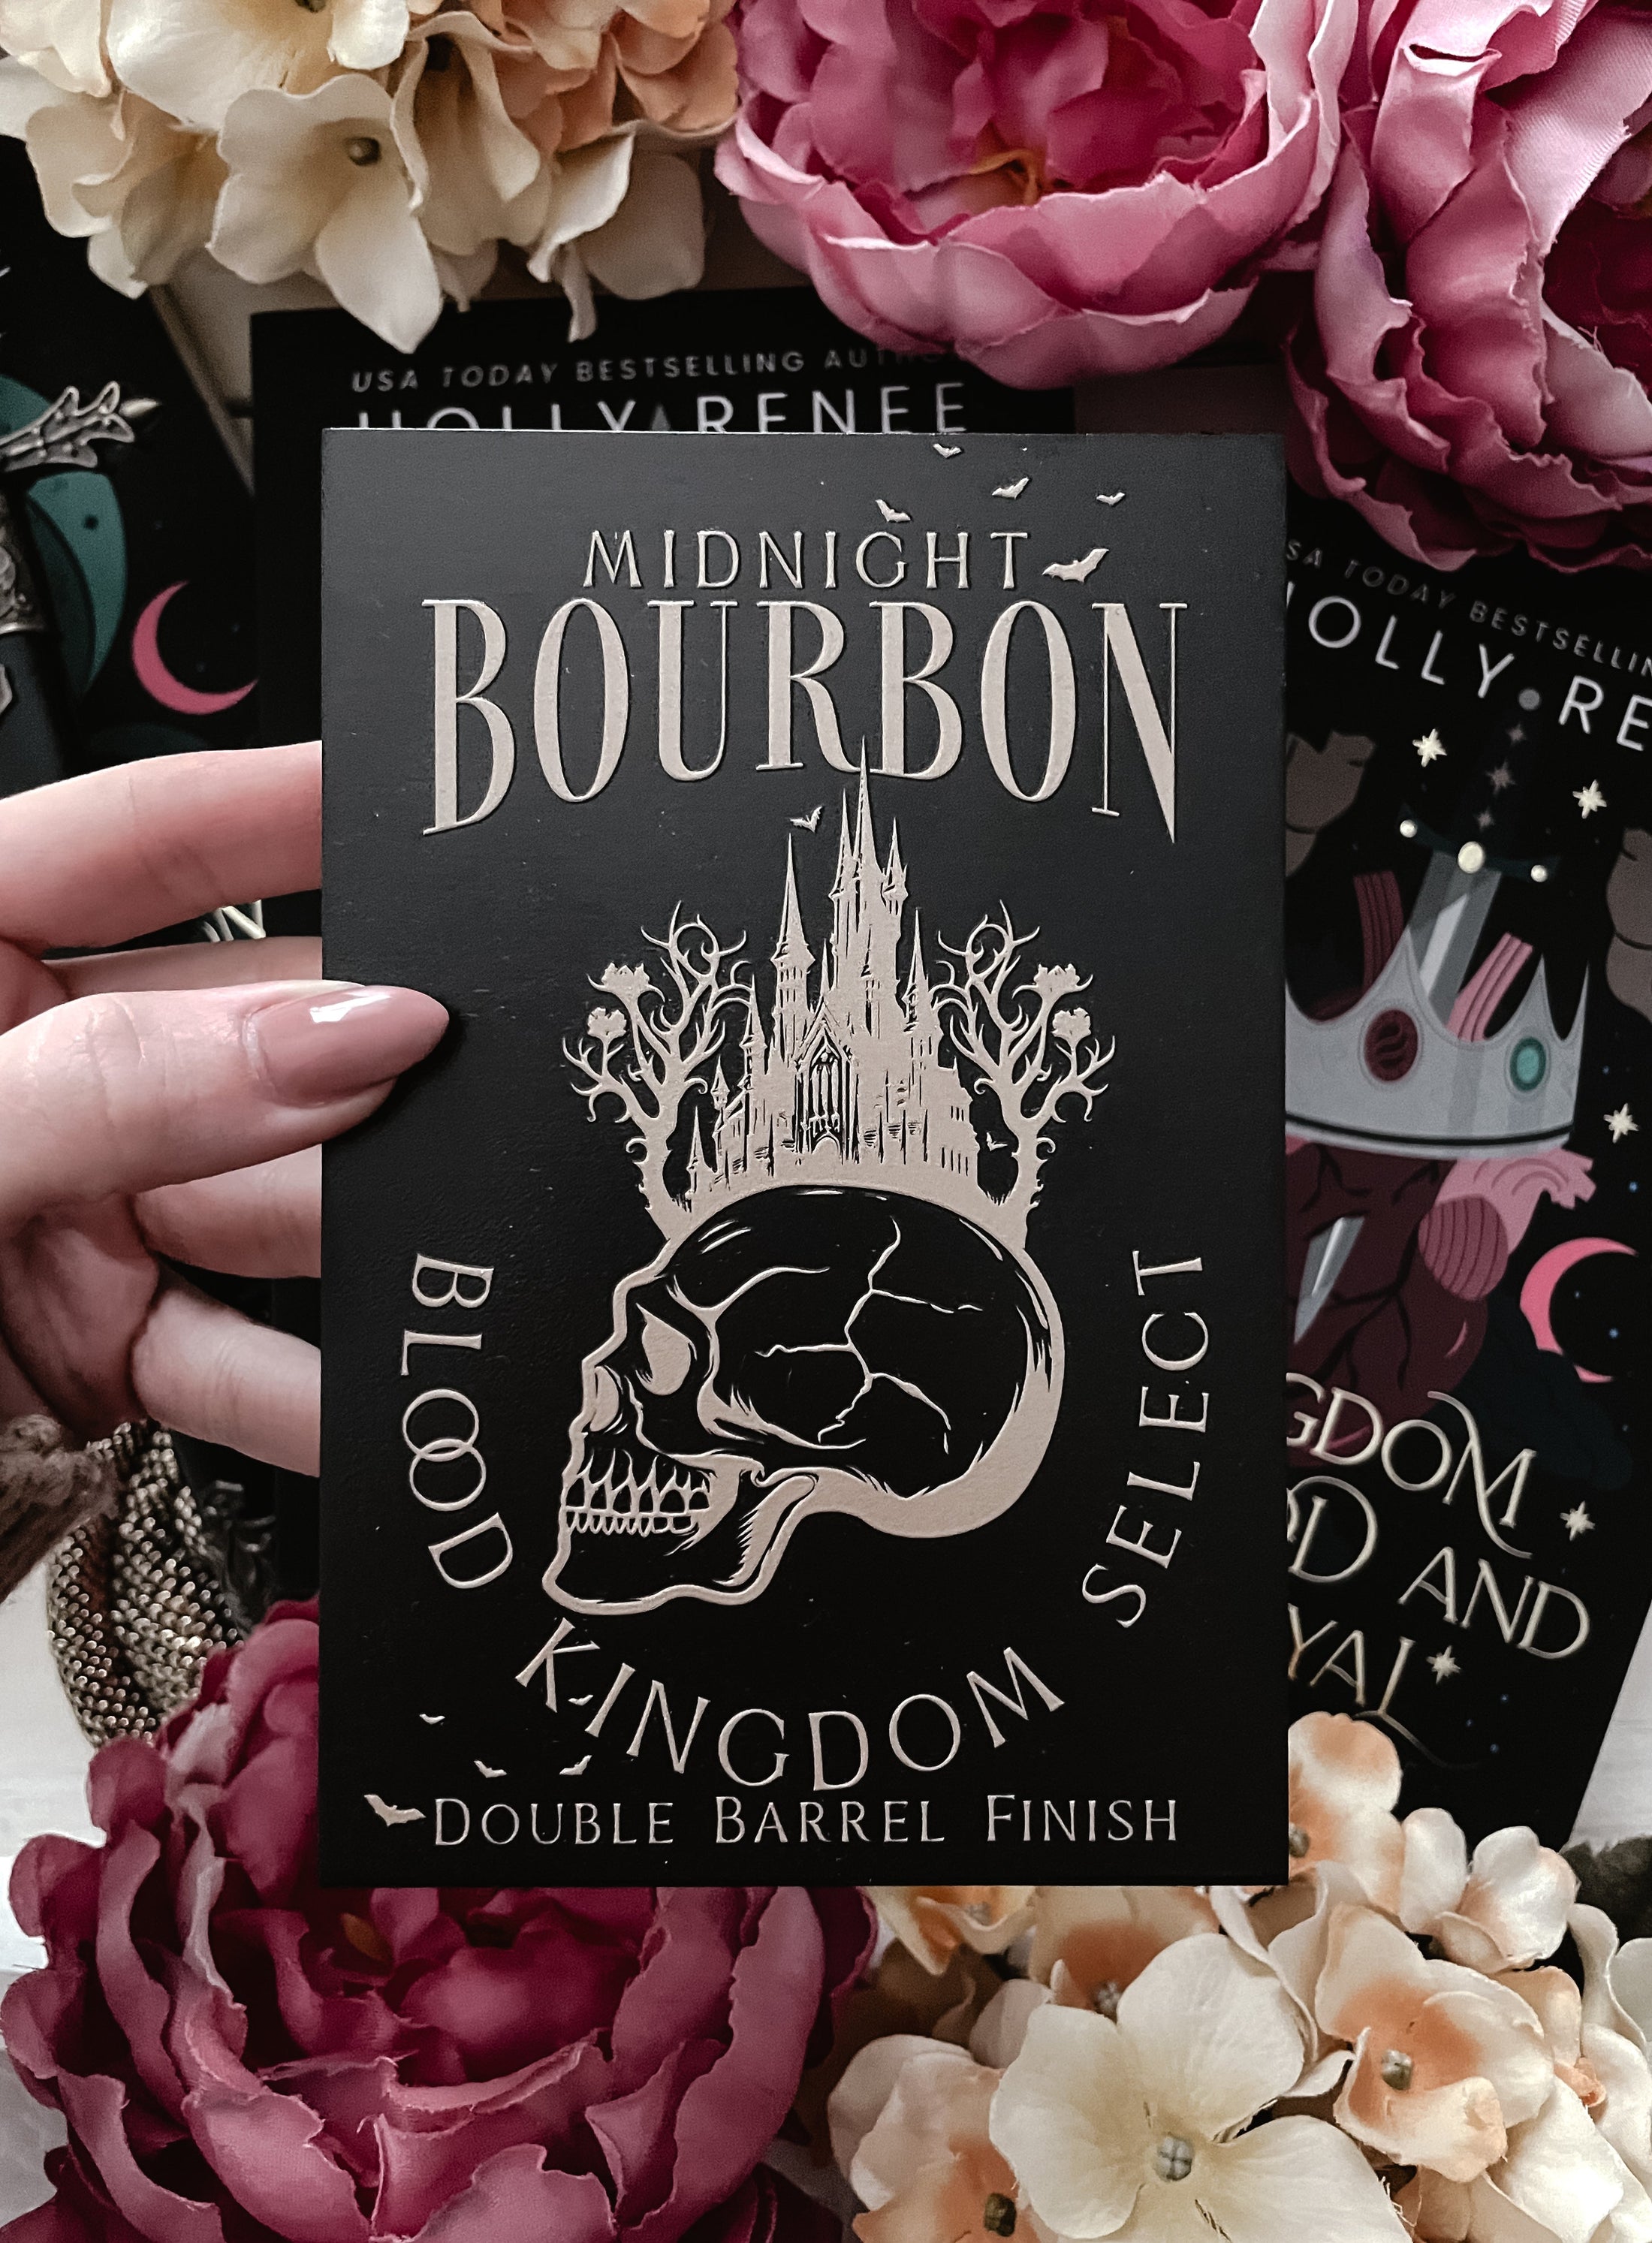 Midnight Bourbon Blood Kingdom Select sign - Holly Renee, created by FireDrake Artistry™